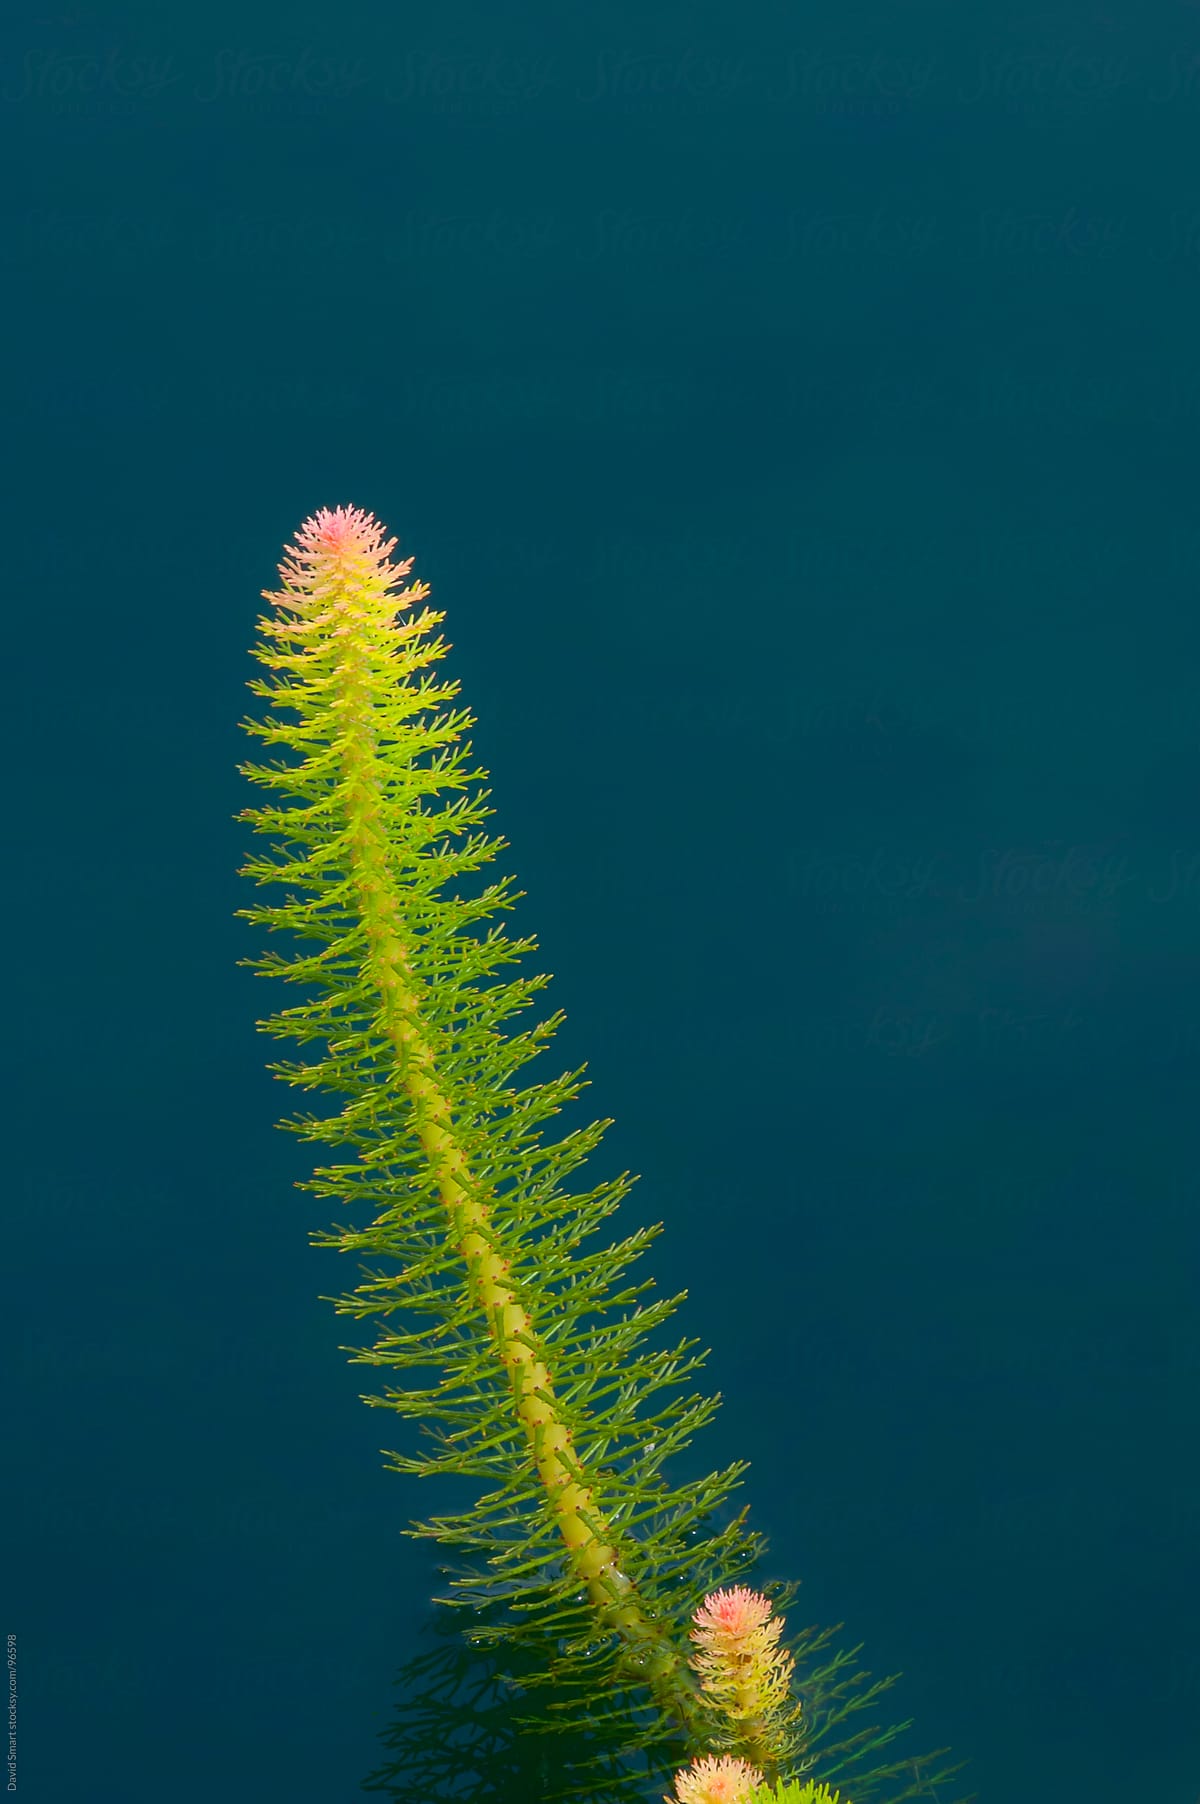 An aquatic plant growing in dark blue-green pond water